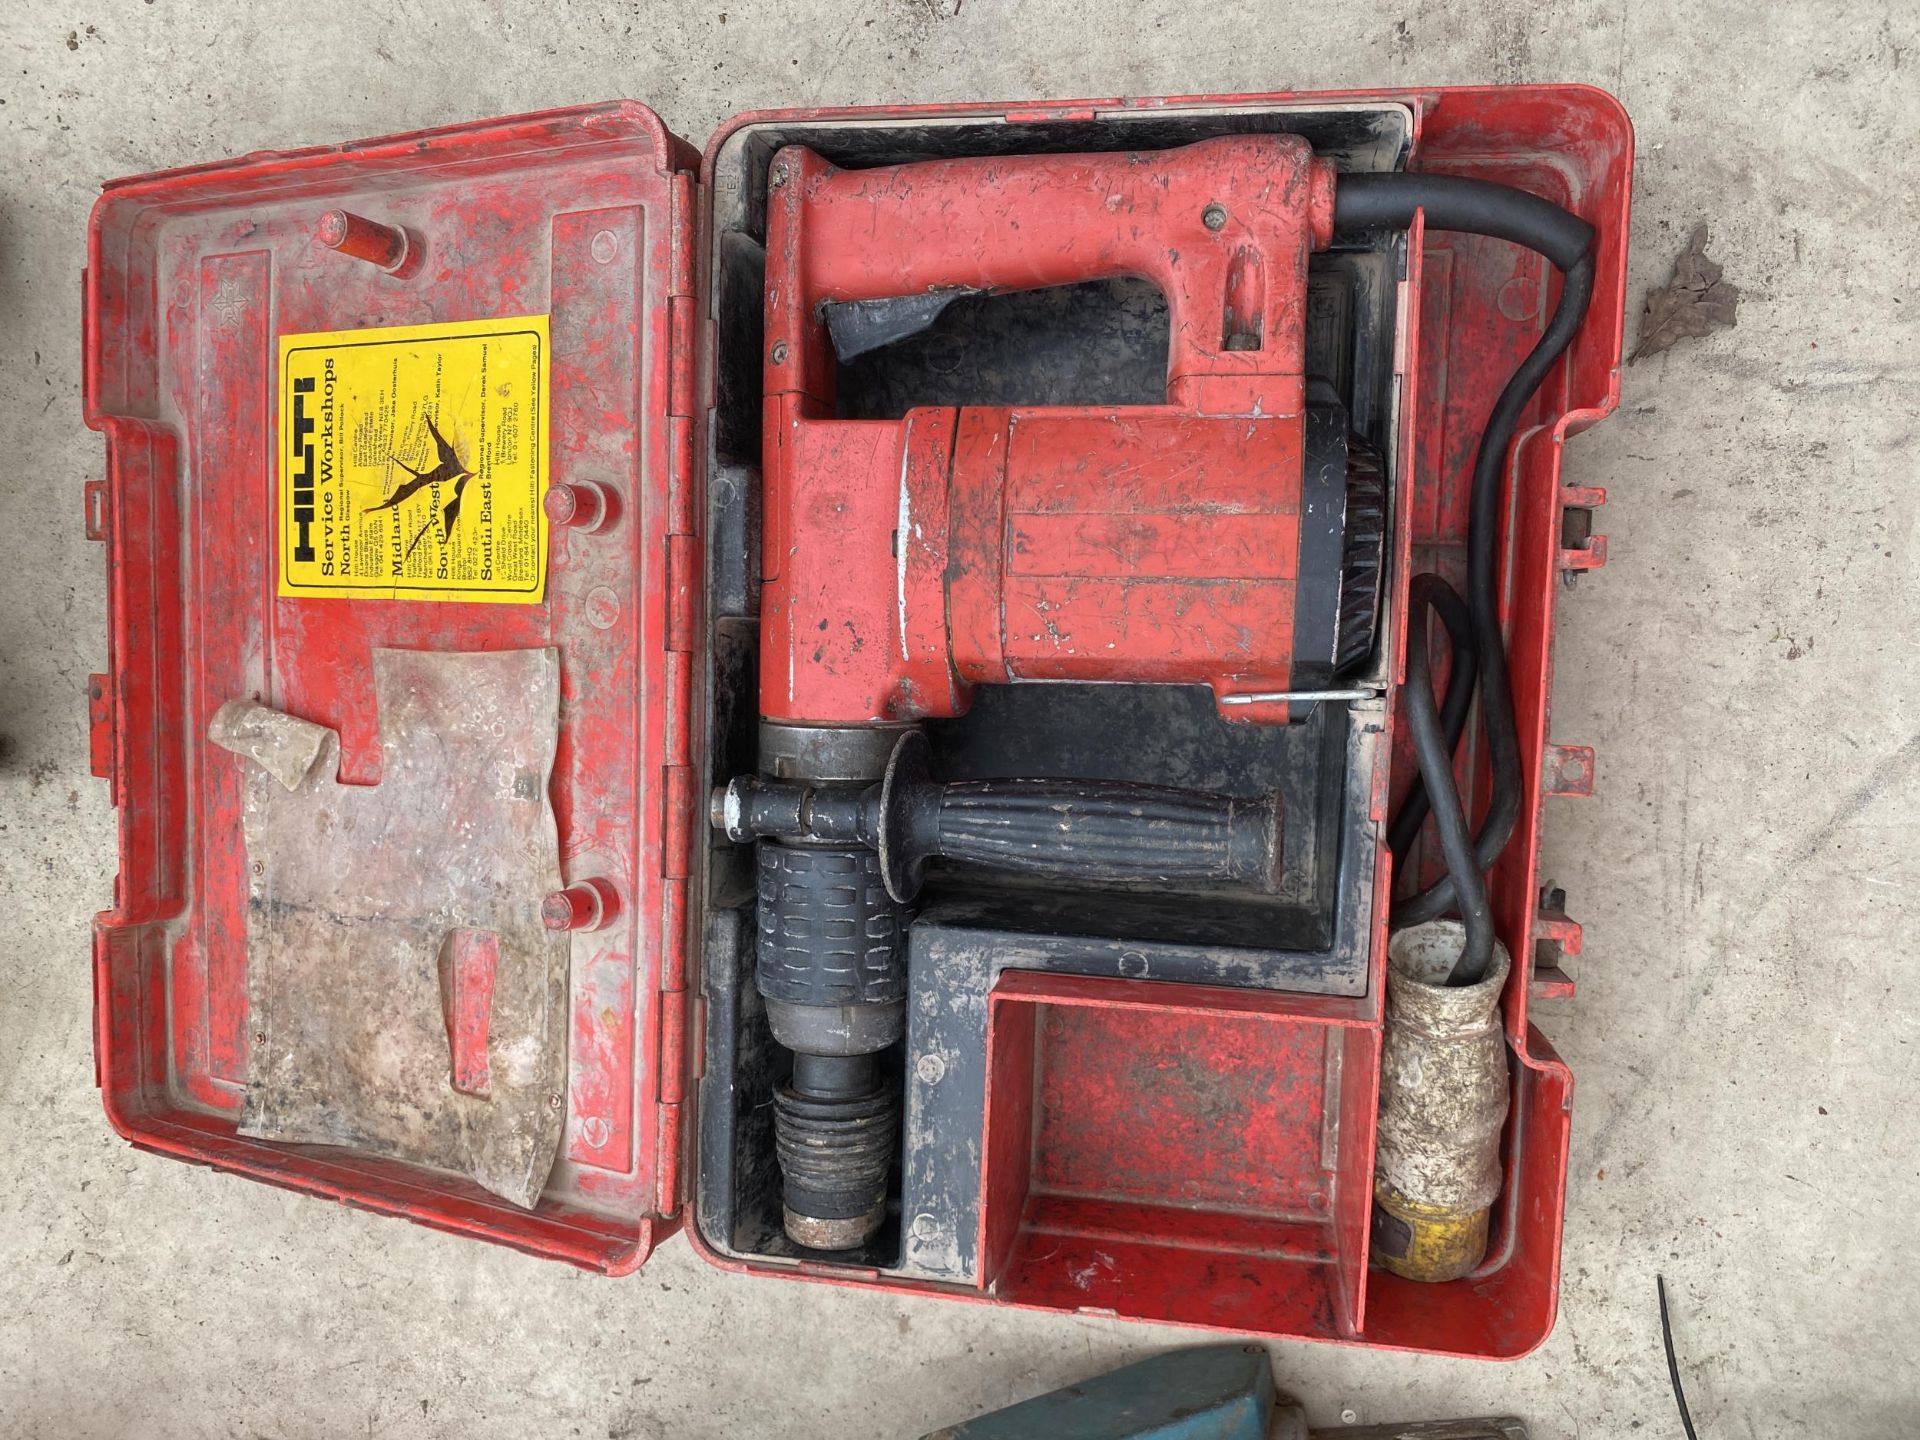 TWO CASED POWER TOOLS INCLUDING A HILTI HAMMER DRILL - Image 2 of 3